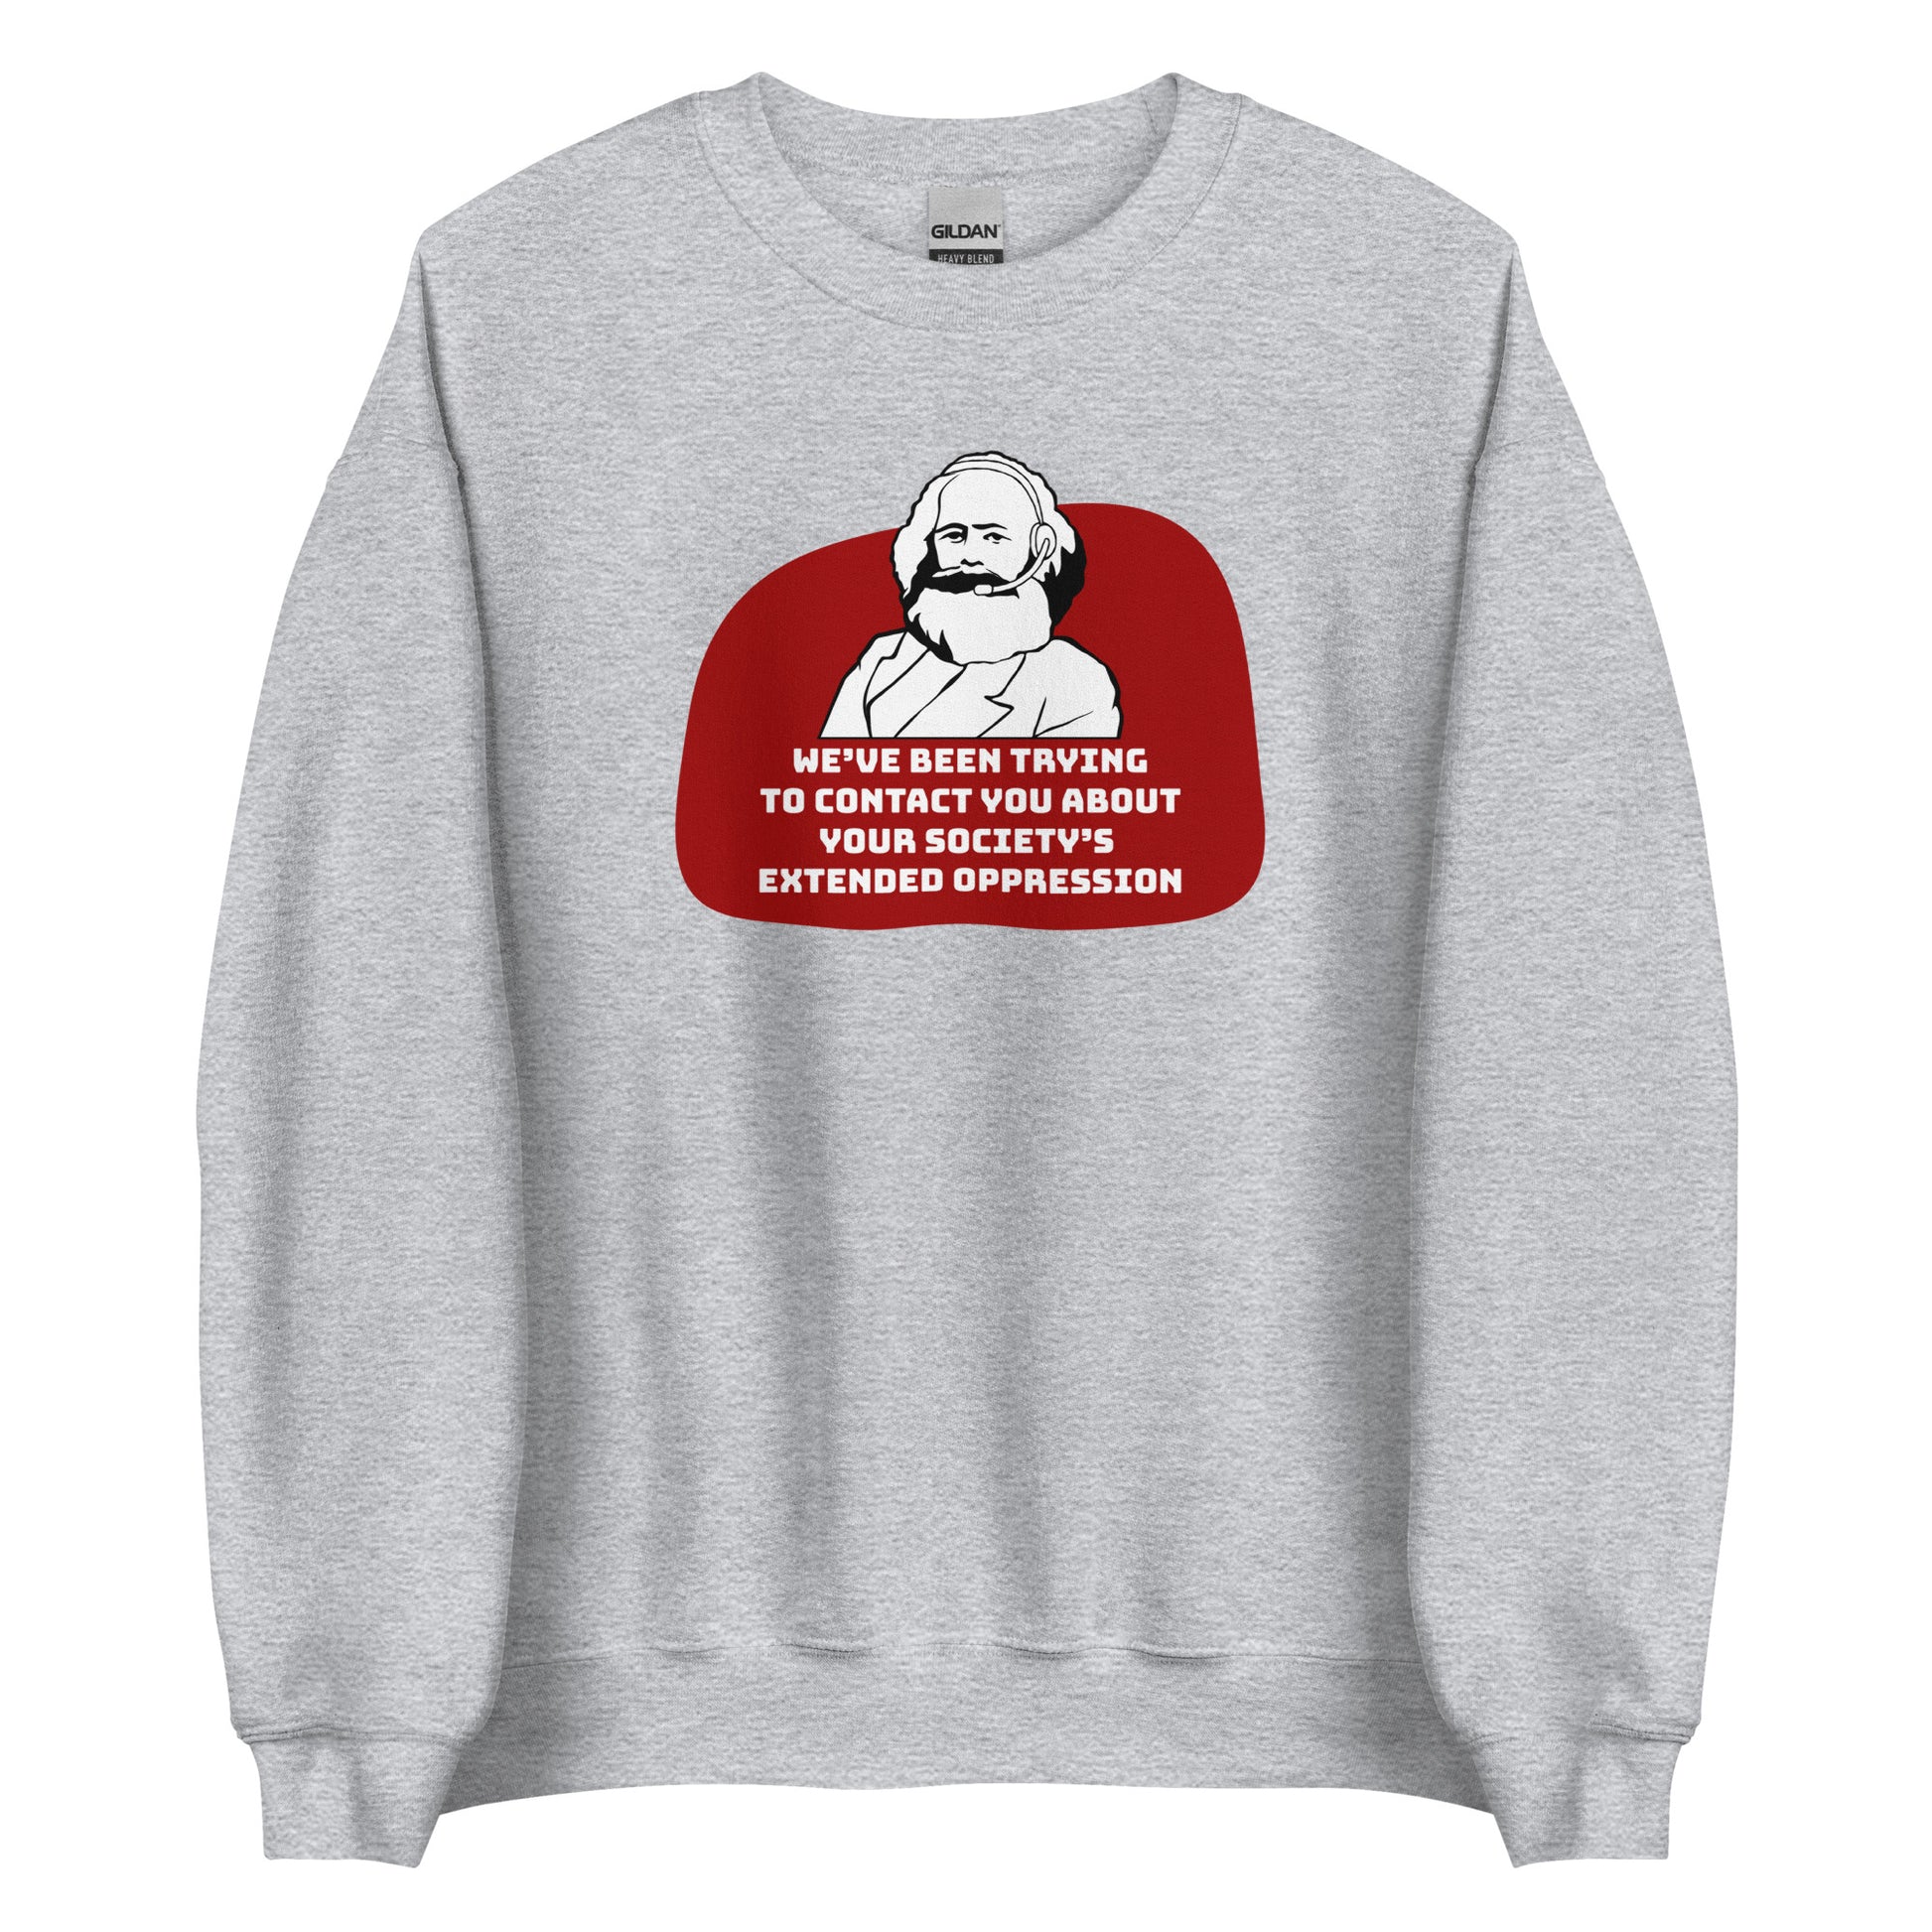 A grey crewneck sweatshirt featuring a black and white illustration of Karl Marx wearing a telemarketer headset. Text beneath Marx reads "We've been trying to contact you about your society's extended oppression." in a blocky font.